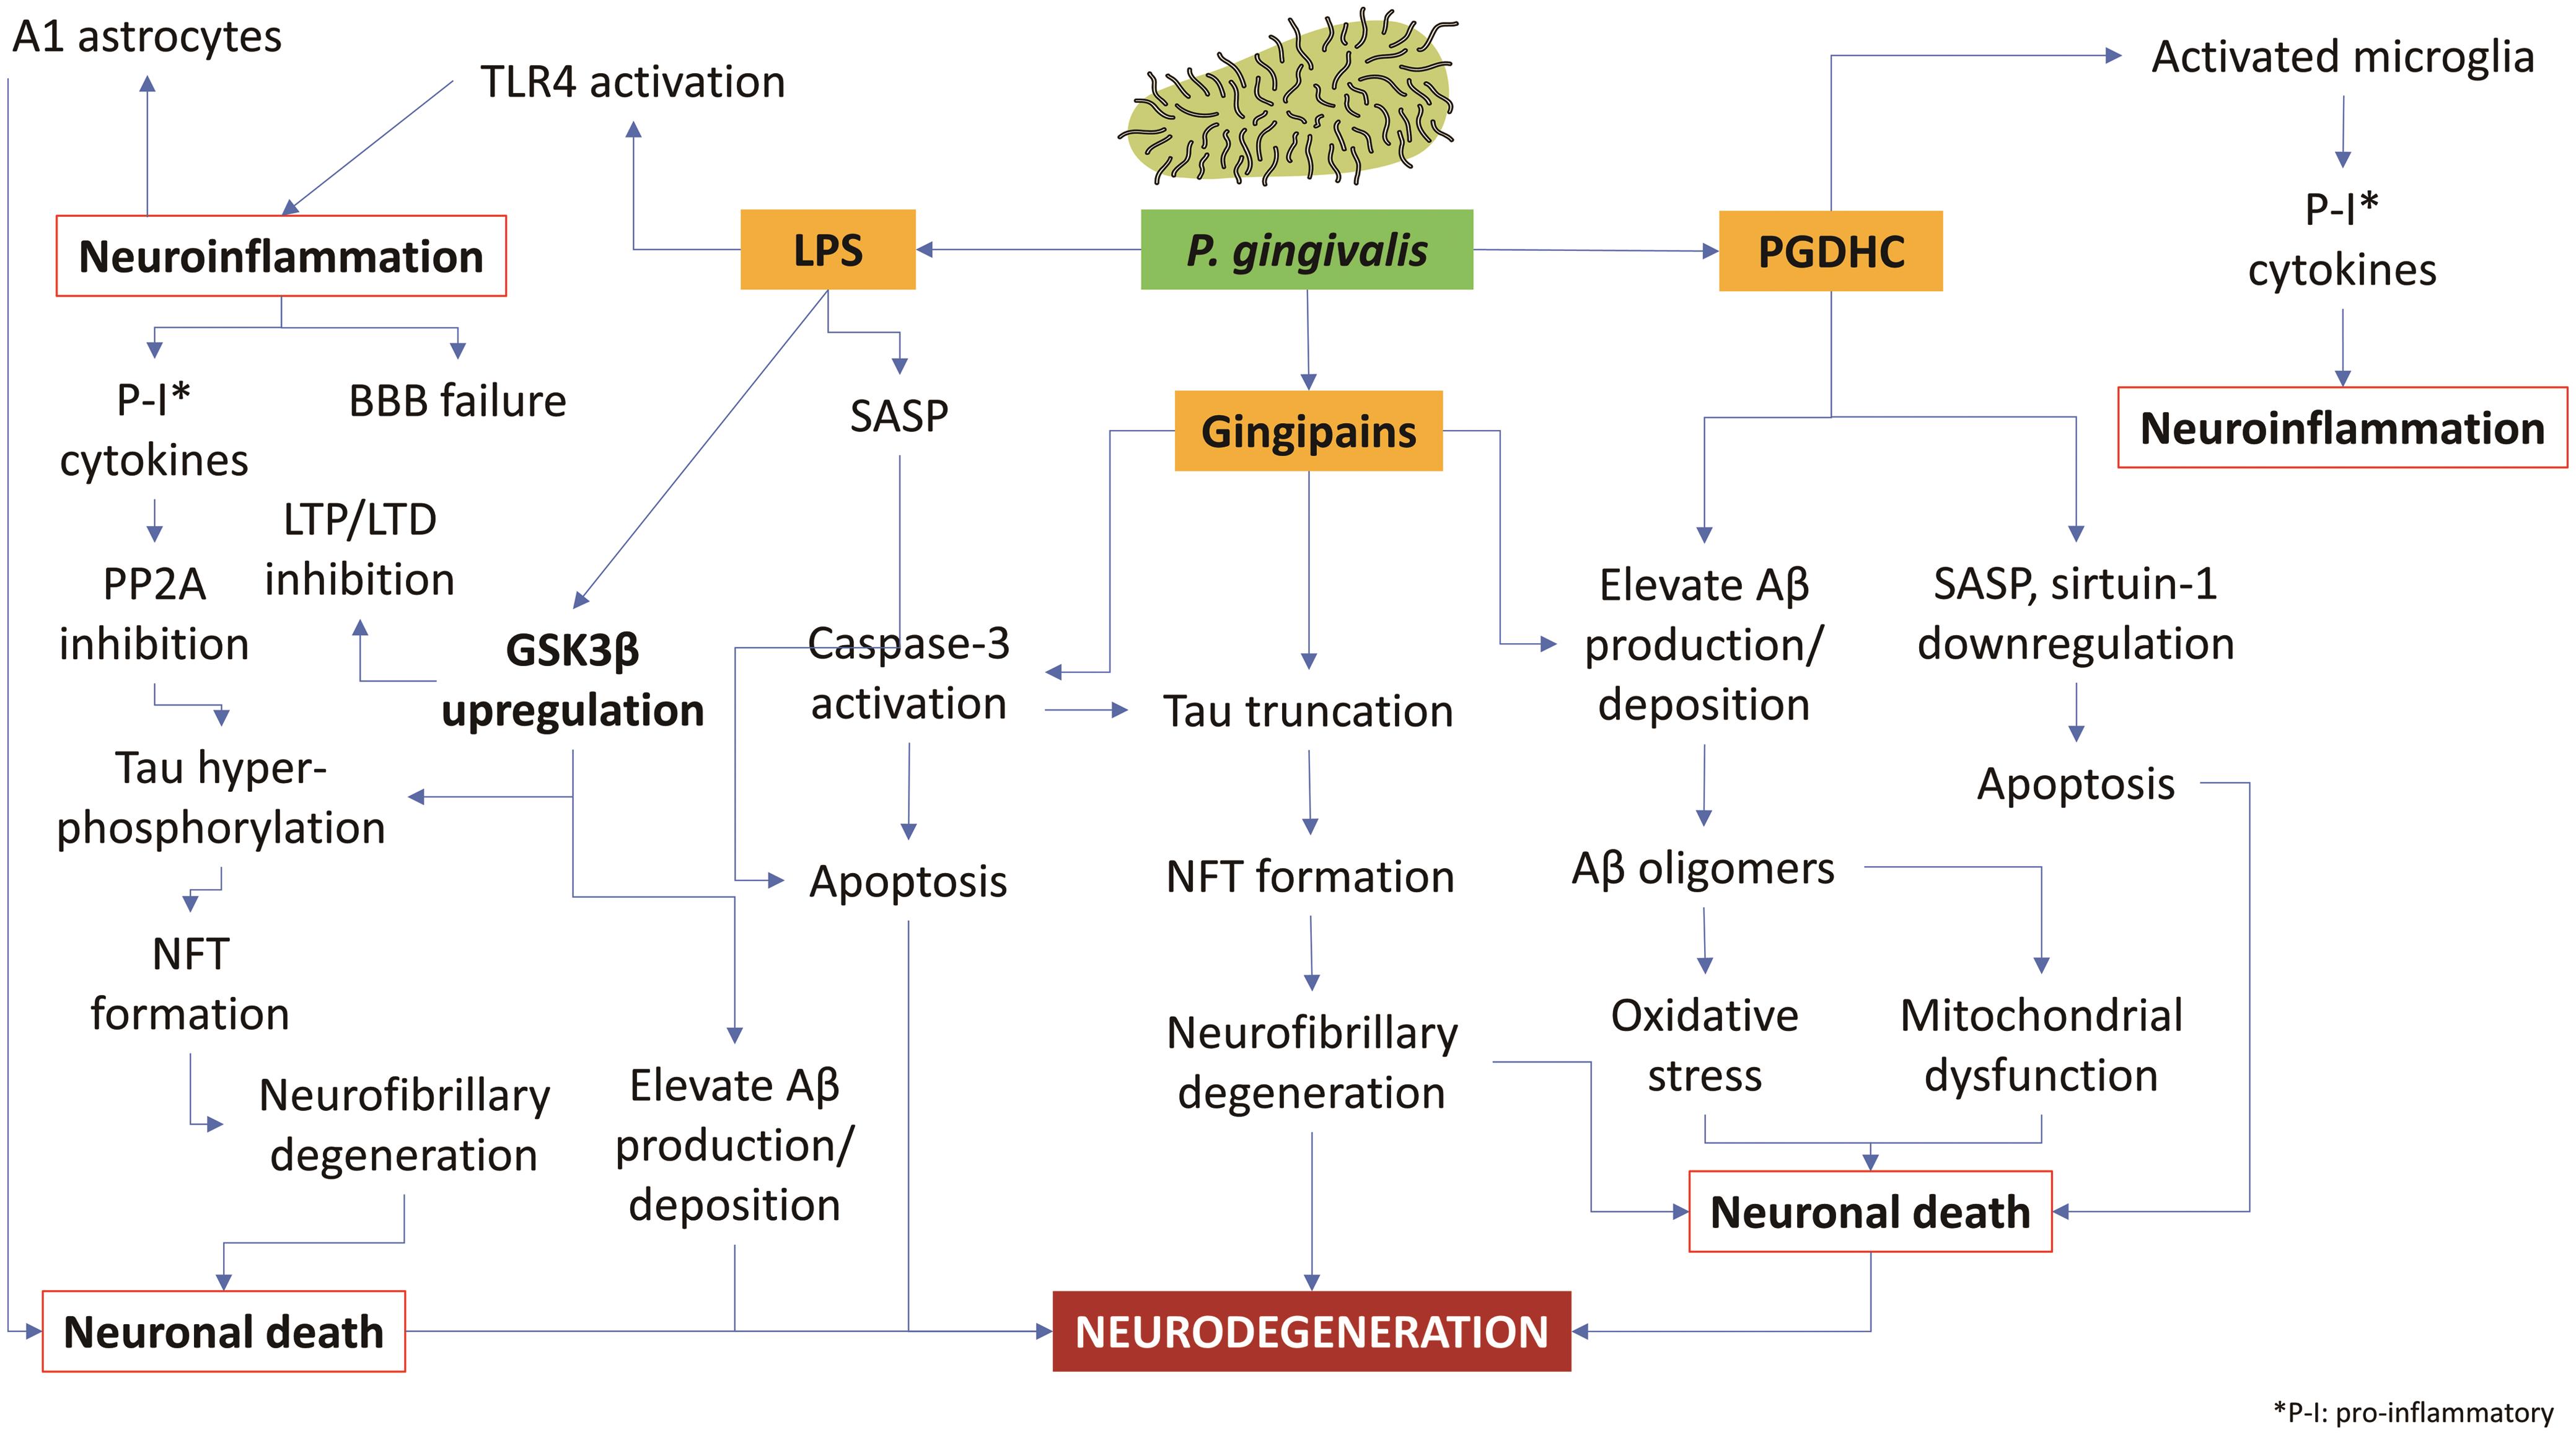 Overview of the roles of <italic>P. gingivalis</italic> virulence factors in Alzheimer’s disease.